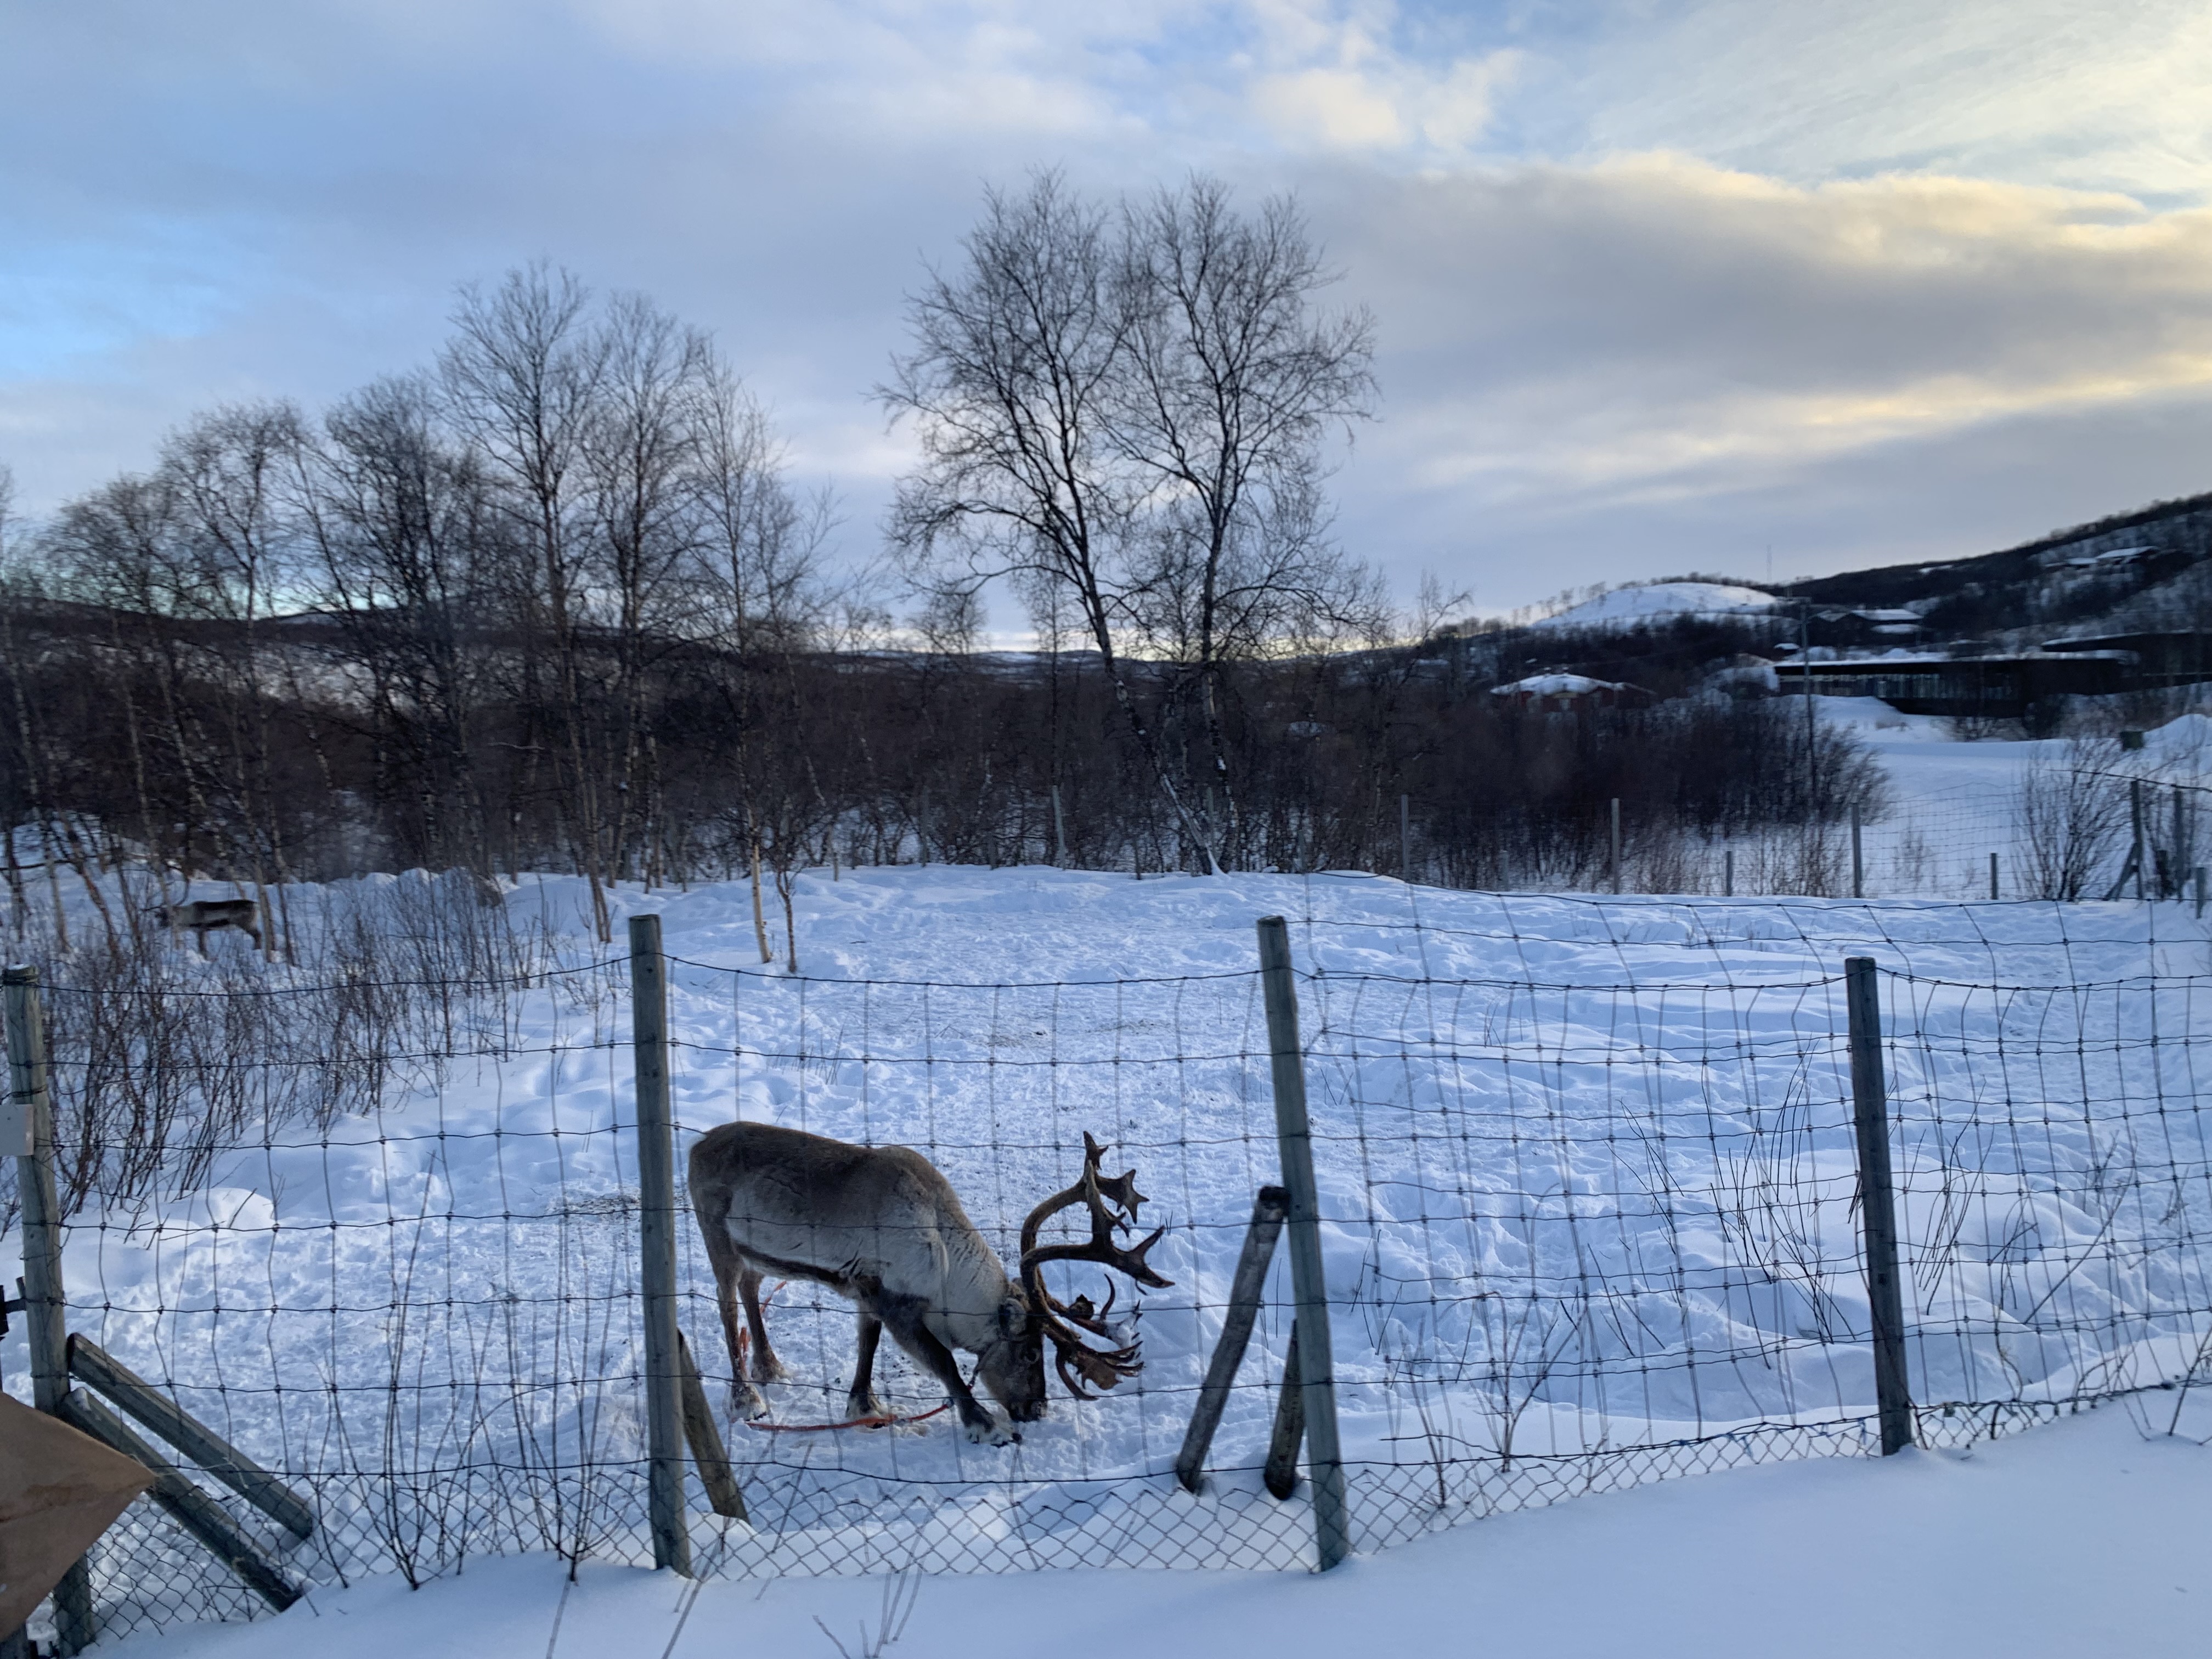  A reindeer in Máze, Norway. Not all Sami children have access to traditional activities and the school system can play an important role in helping Sami children connect with their culture, say educators. (Eilís Quinn/Eye on the Arctic) 